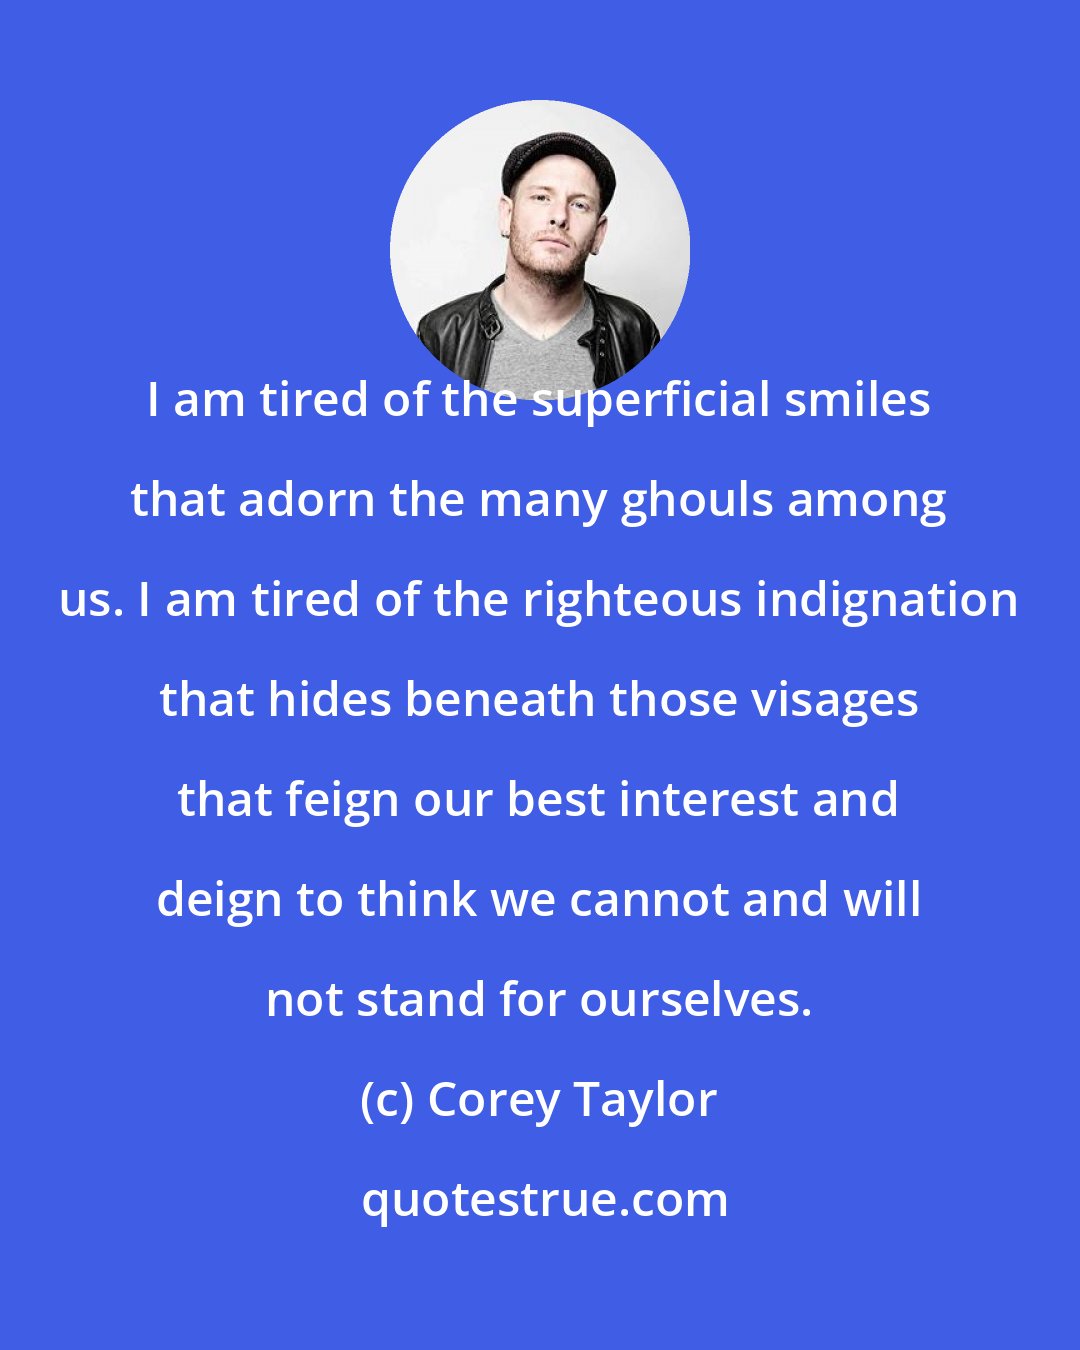 Corey Taylor: I am tired of the superficial smiles that adorn the many ghouls among us. I am tired of the righteous indignation that hides beneath those visages that feign our best interest and deign to think we cannot and will not stand for ourselves.